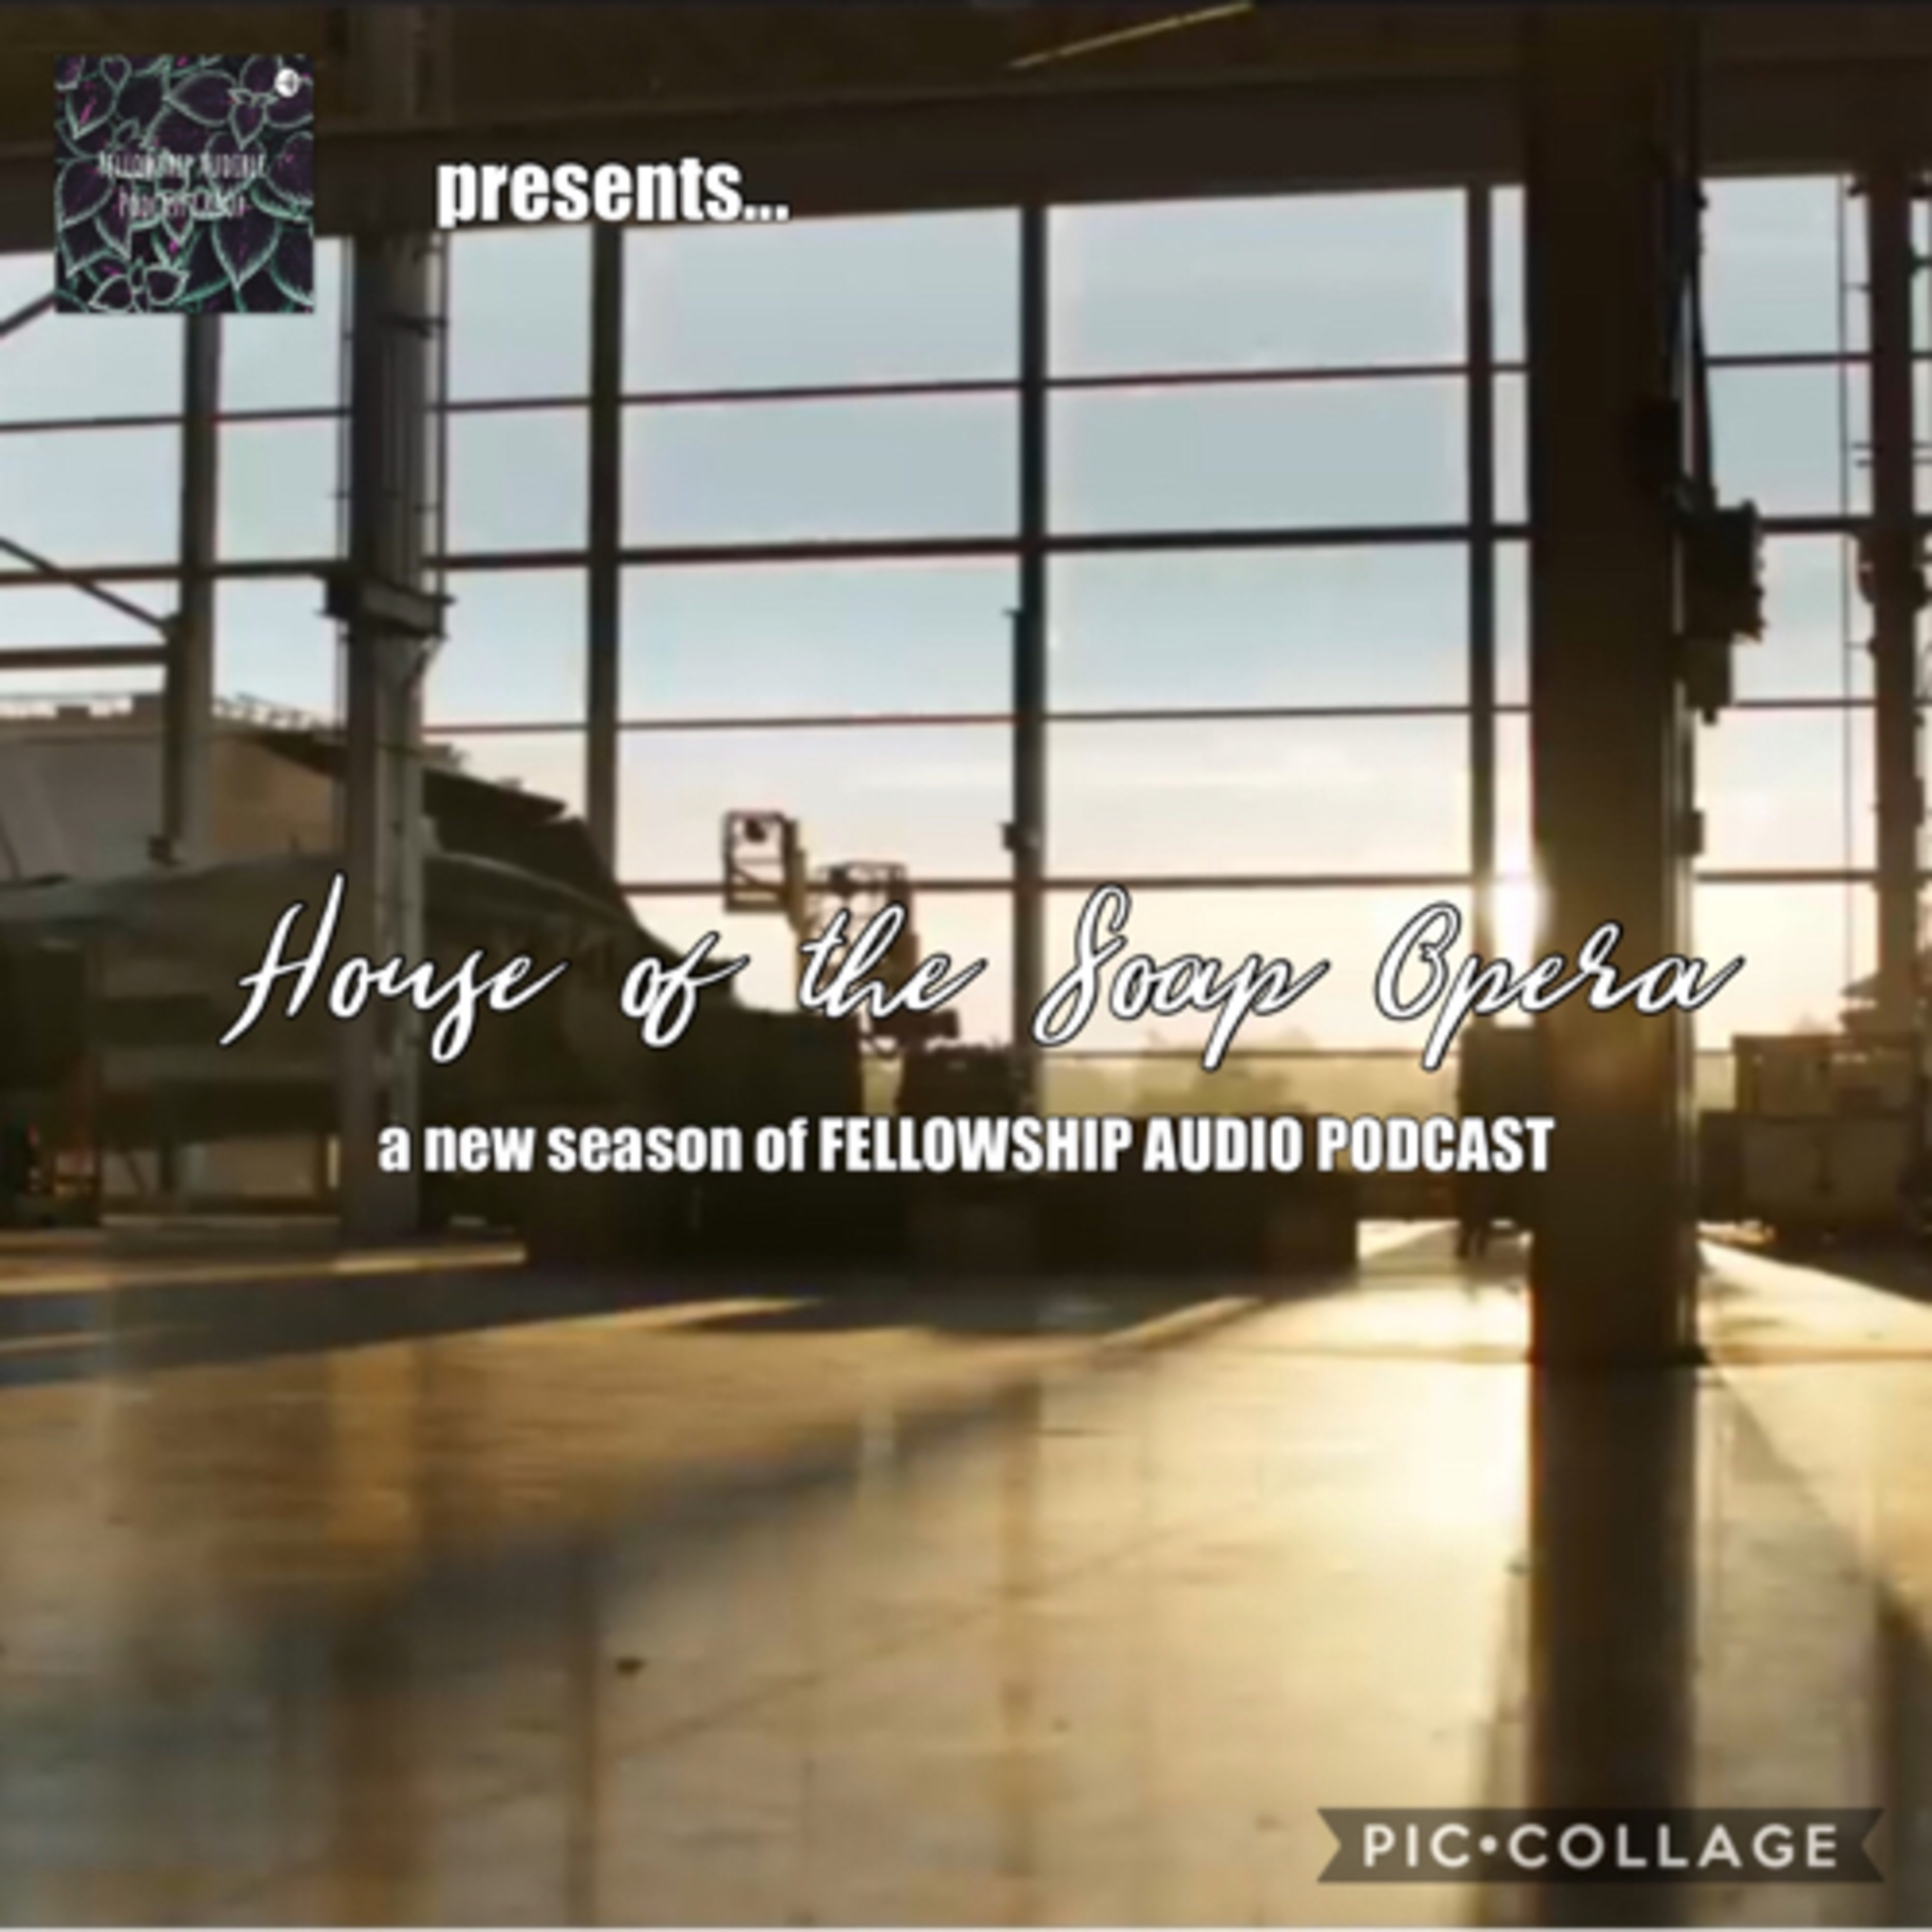 PREVIEW: House of the Soap Opera | Fellowship Audio Podcast